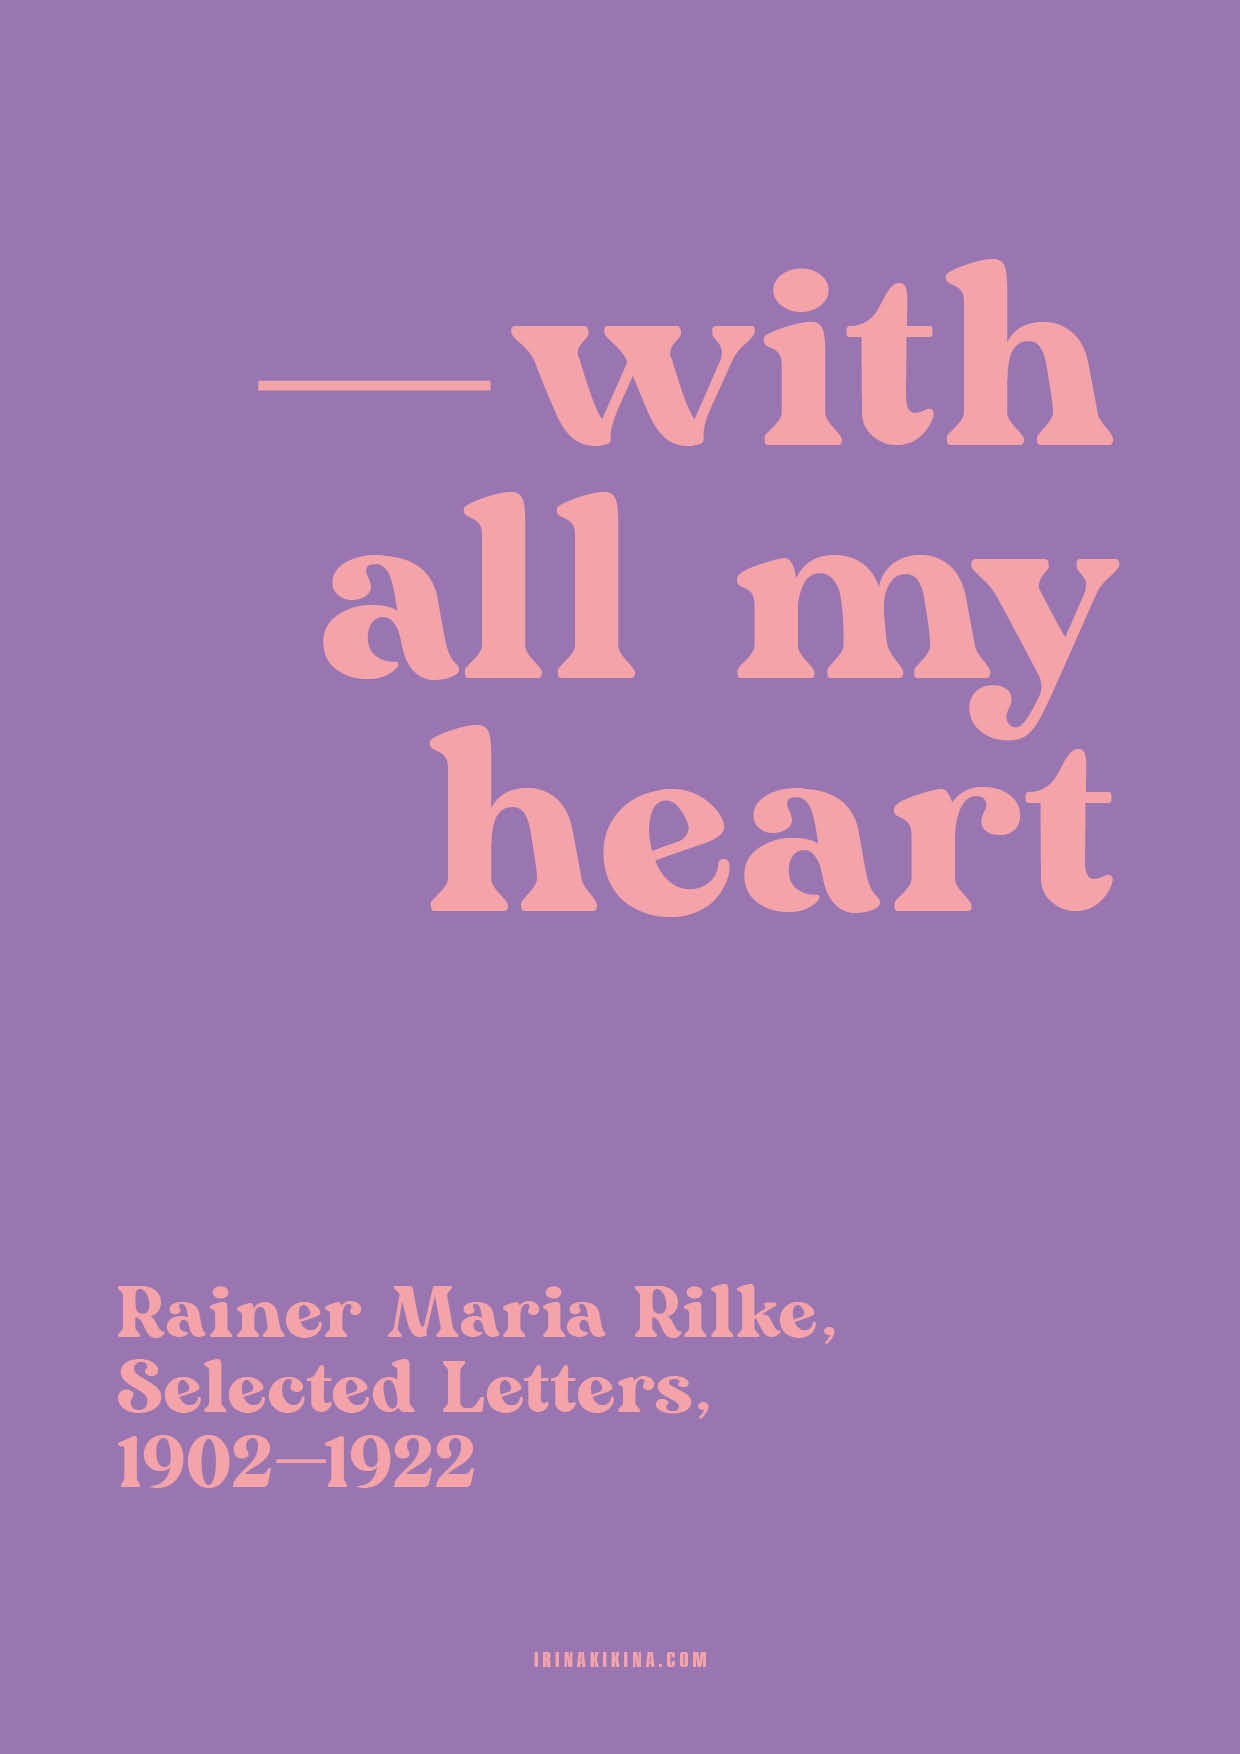 With All my Love. Rilke Letter Quote Artwork. A4 Poster. Restock is Coming